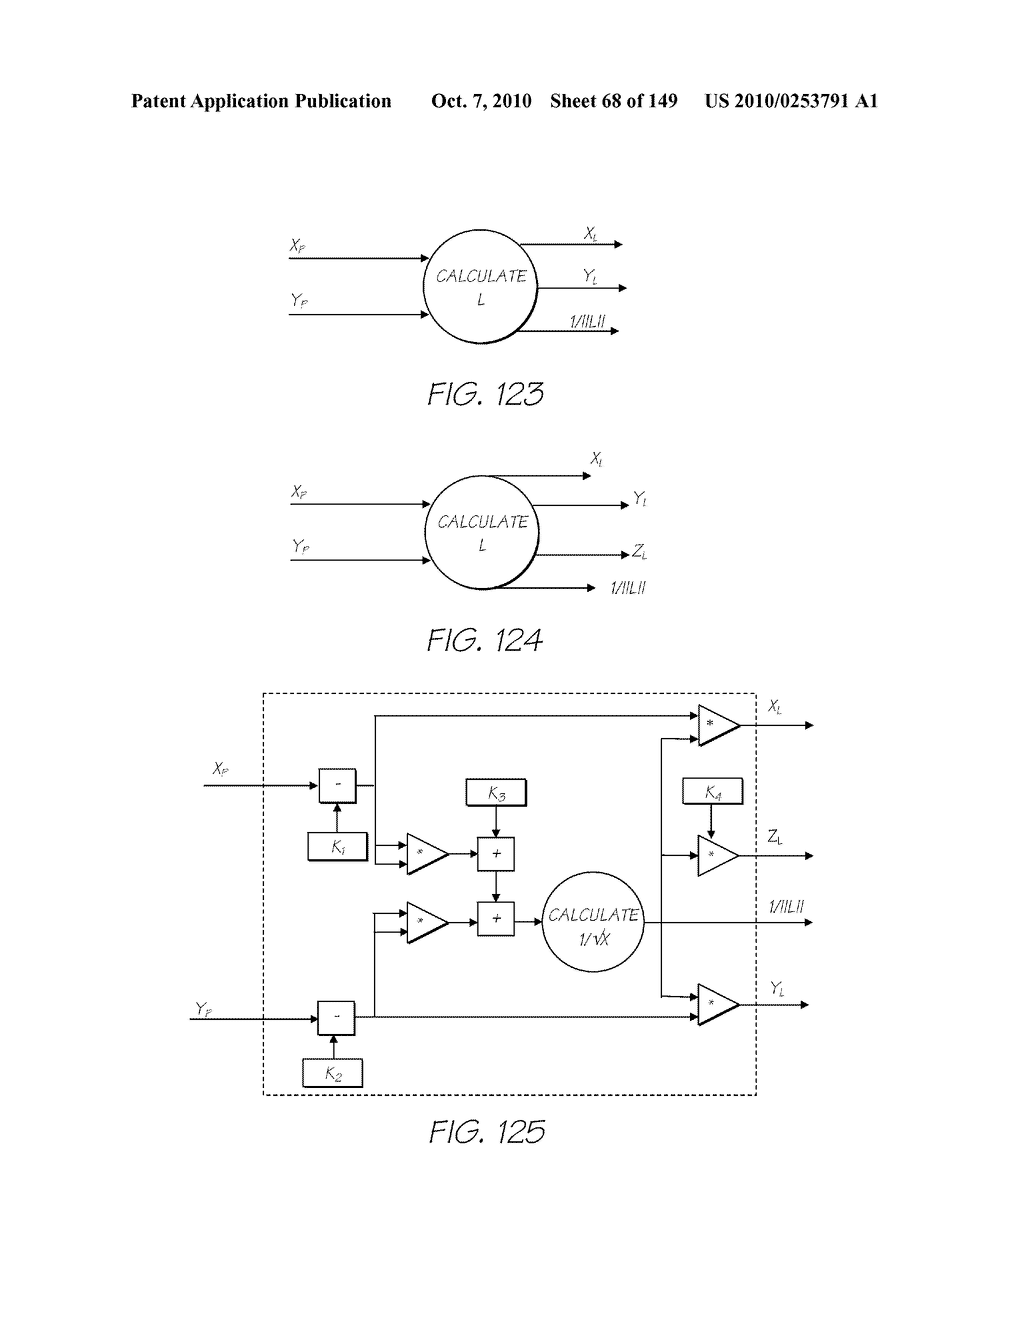 CAMERA SENSING DEVICE FOR CAPTURING AND MANIPULATING IMAGES - diagram, schematic, and image 69